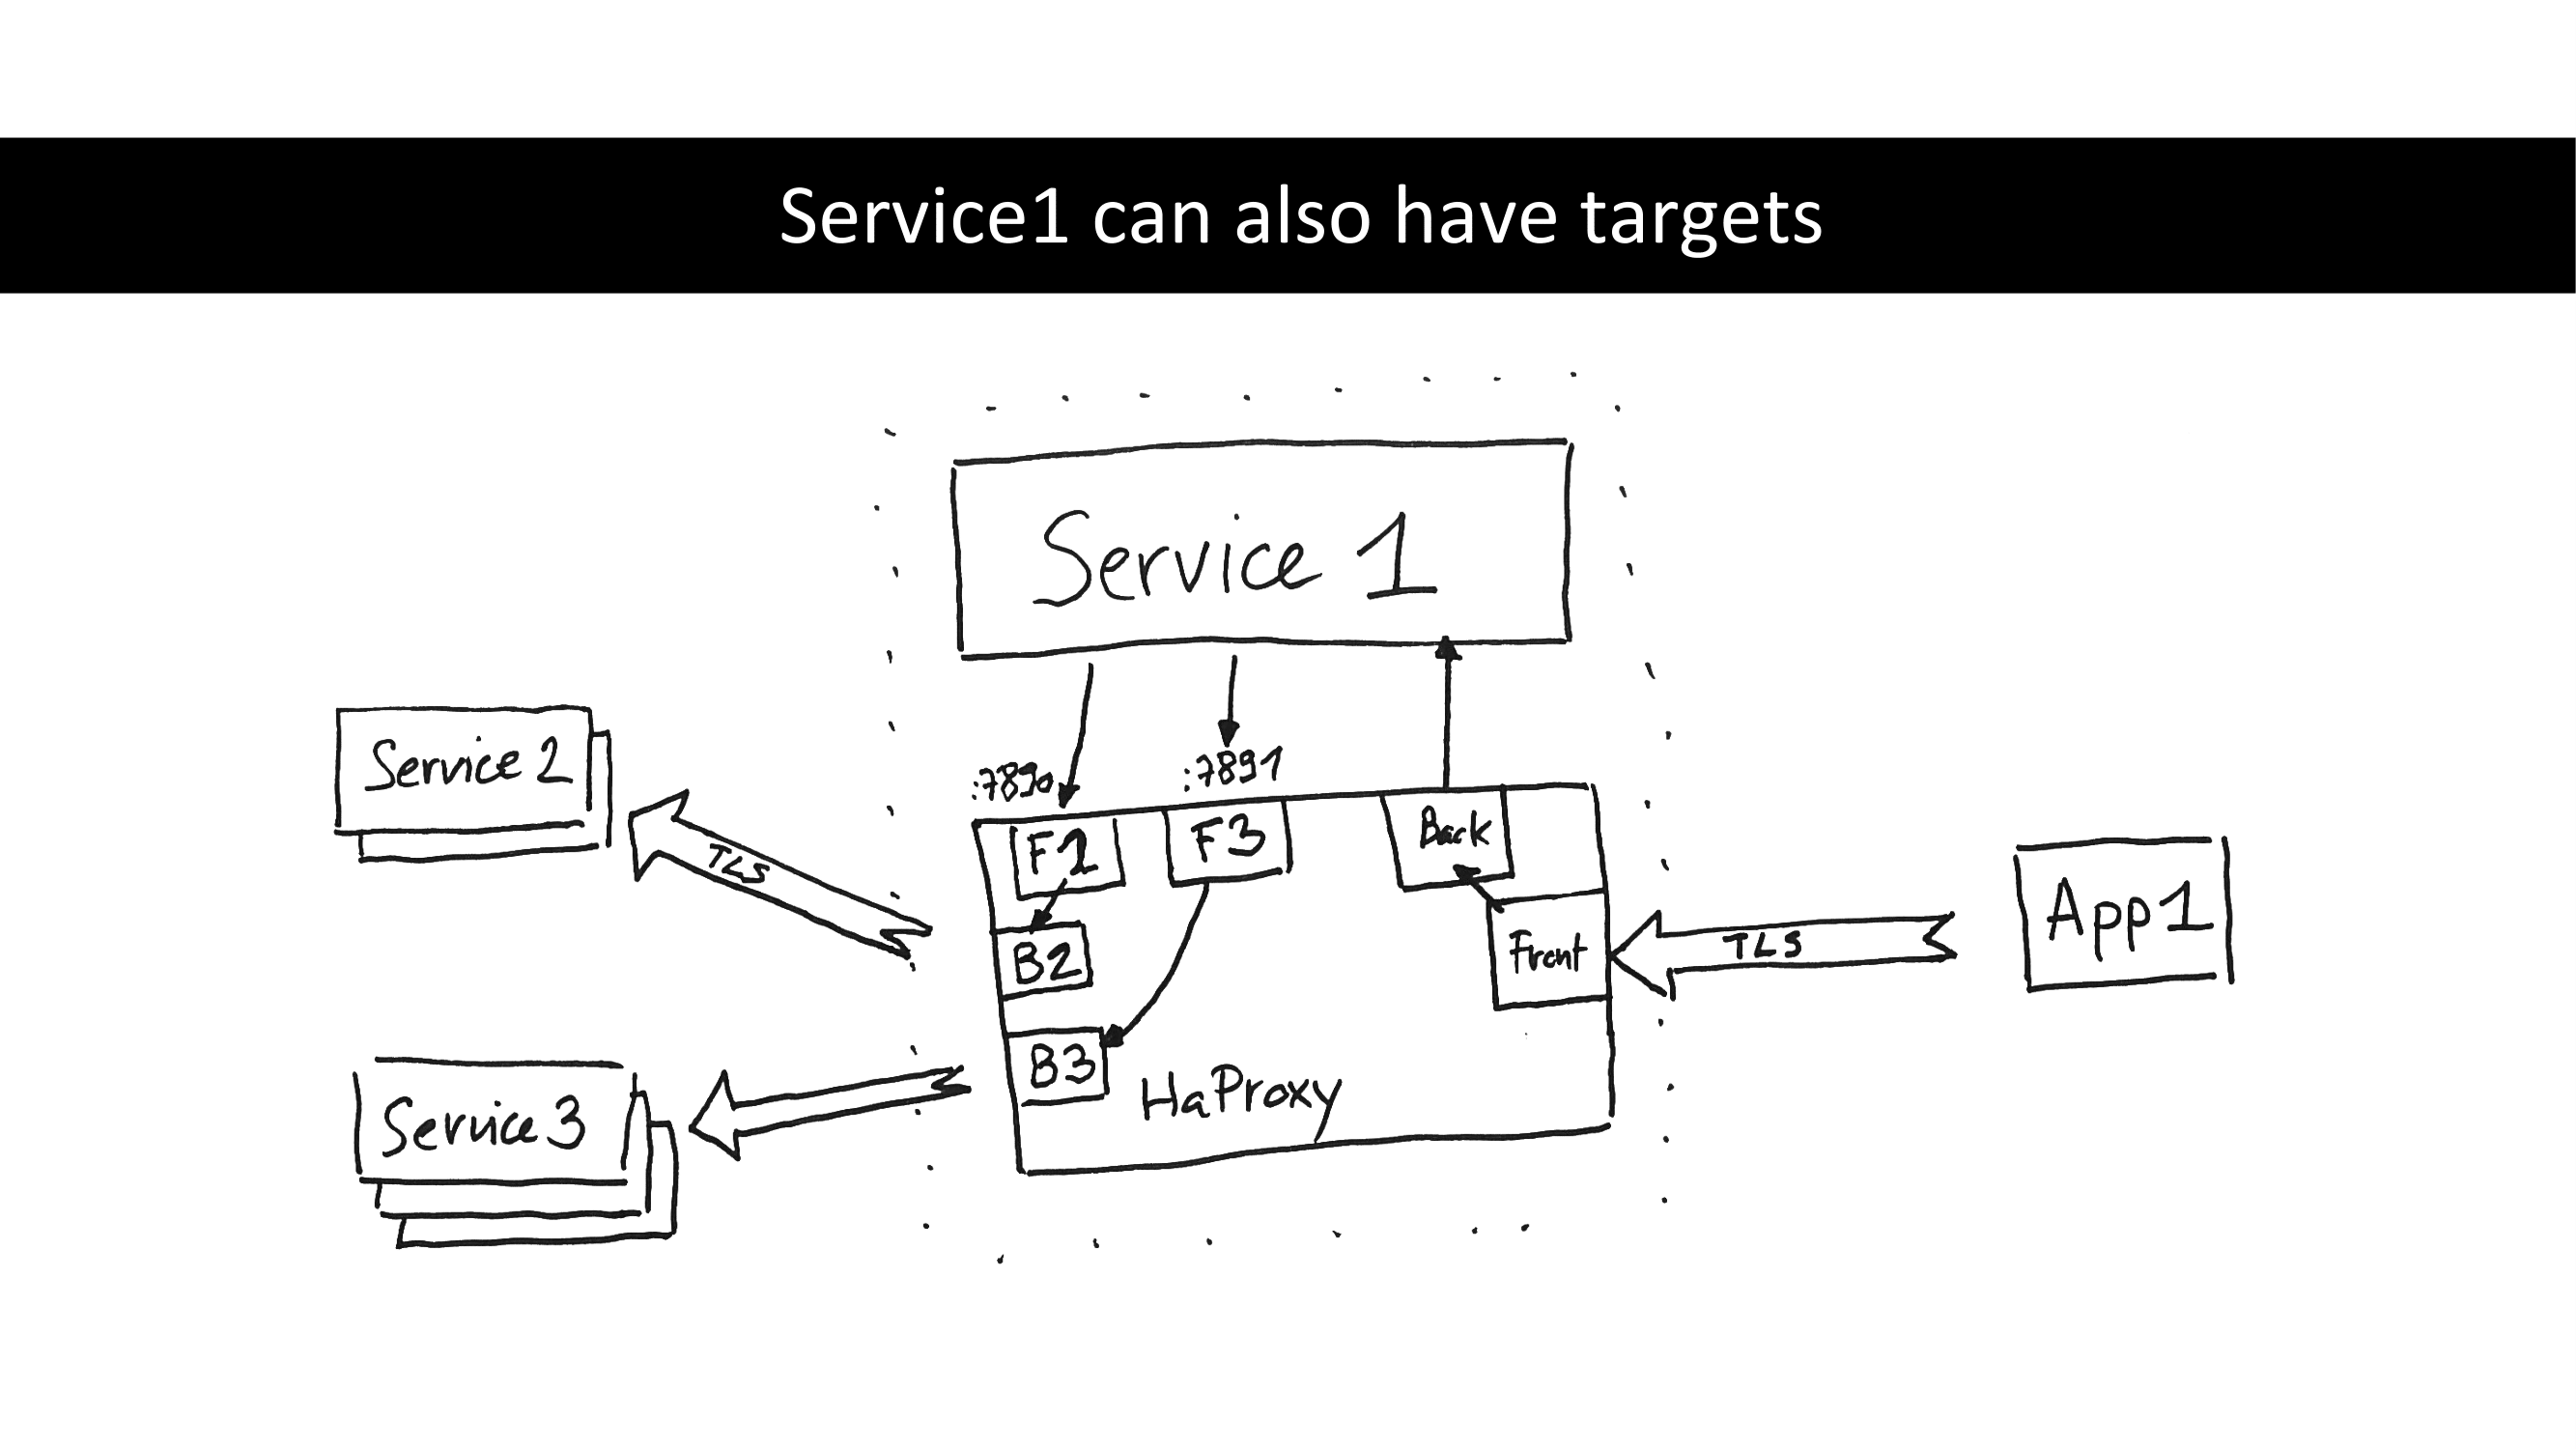 27.-service1-can-also-have-targets